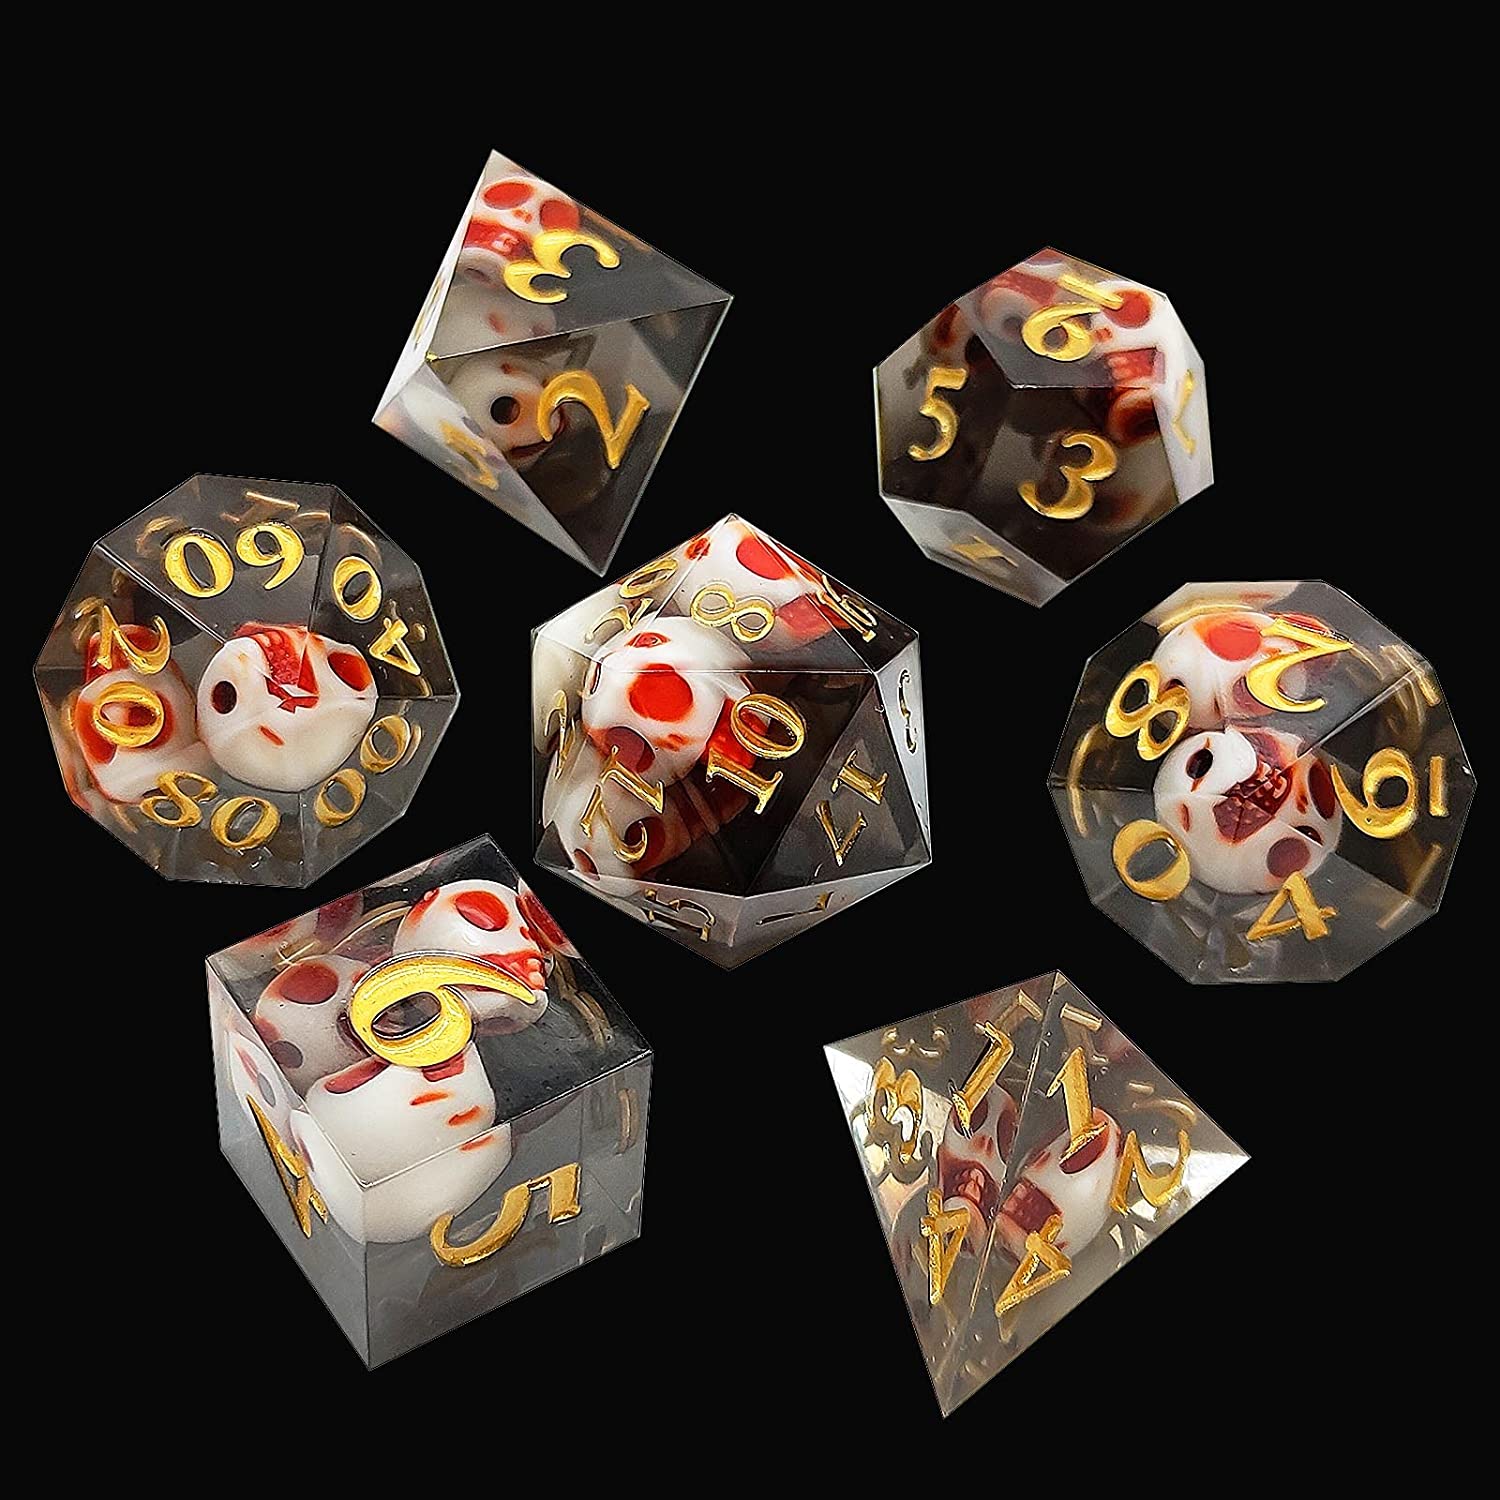 LANSAI DND Resin Sharp Edge Polyhedral Dice Set D&D RPG Suitable for Dungeons and Dragons Role Playing Games Black 